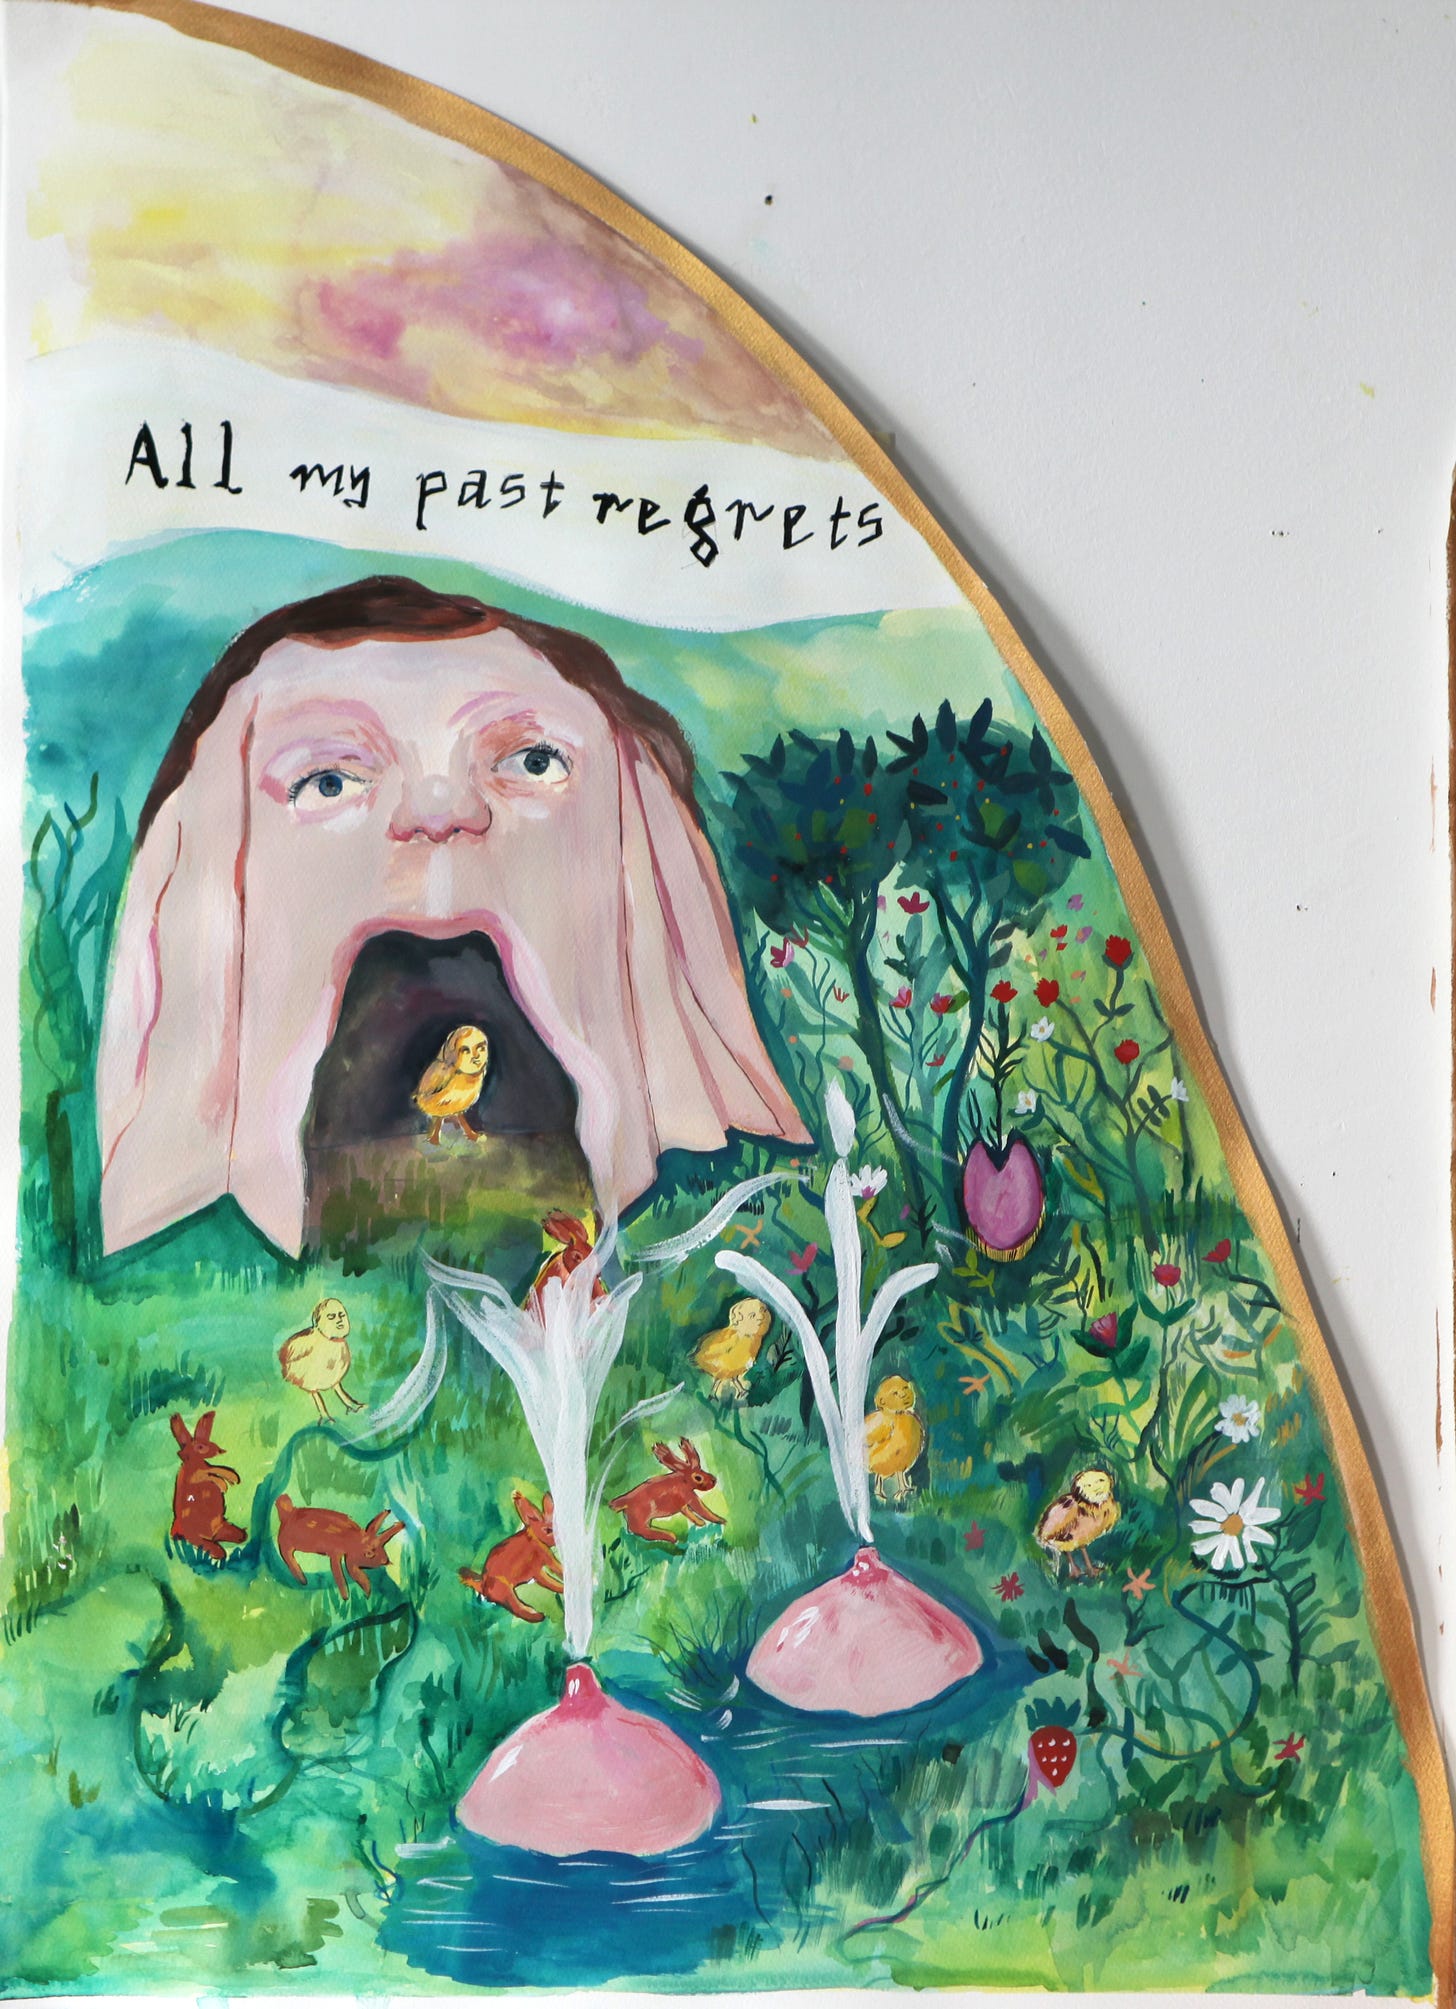 Painting with text 'All my past regrets'. Paitning is a human skin tent with baby chicks with human faces emerging, rabbits, breasts emerging from the ground with milk bursting out like a fountain